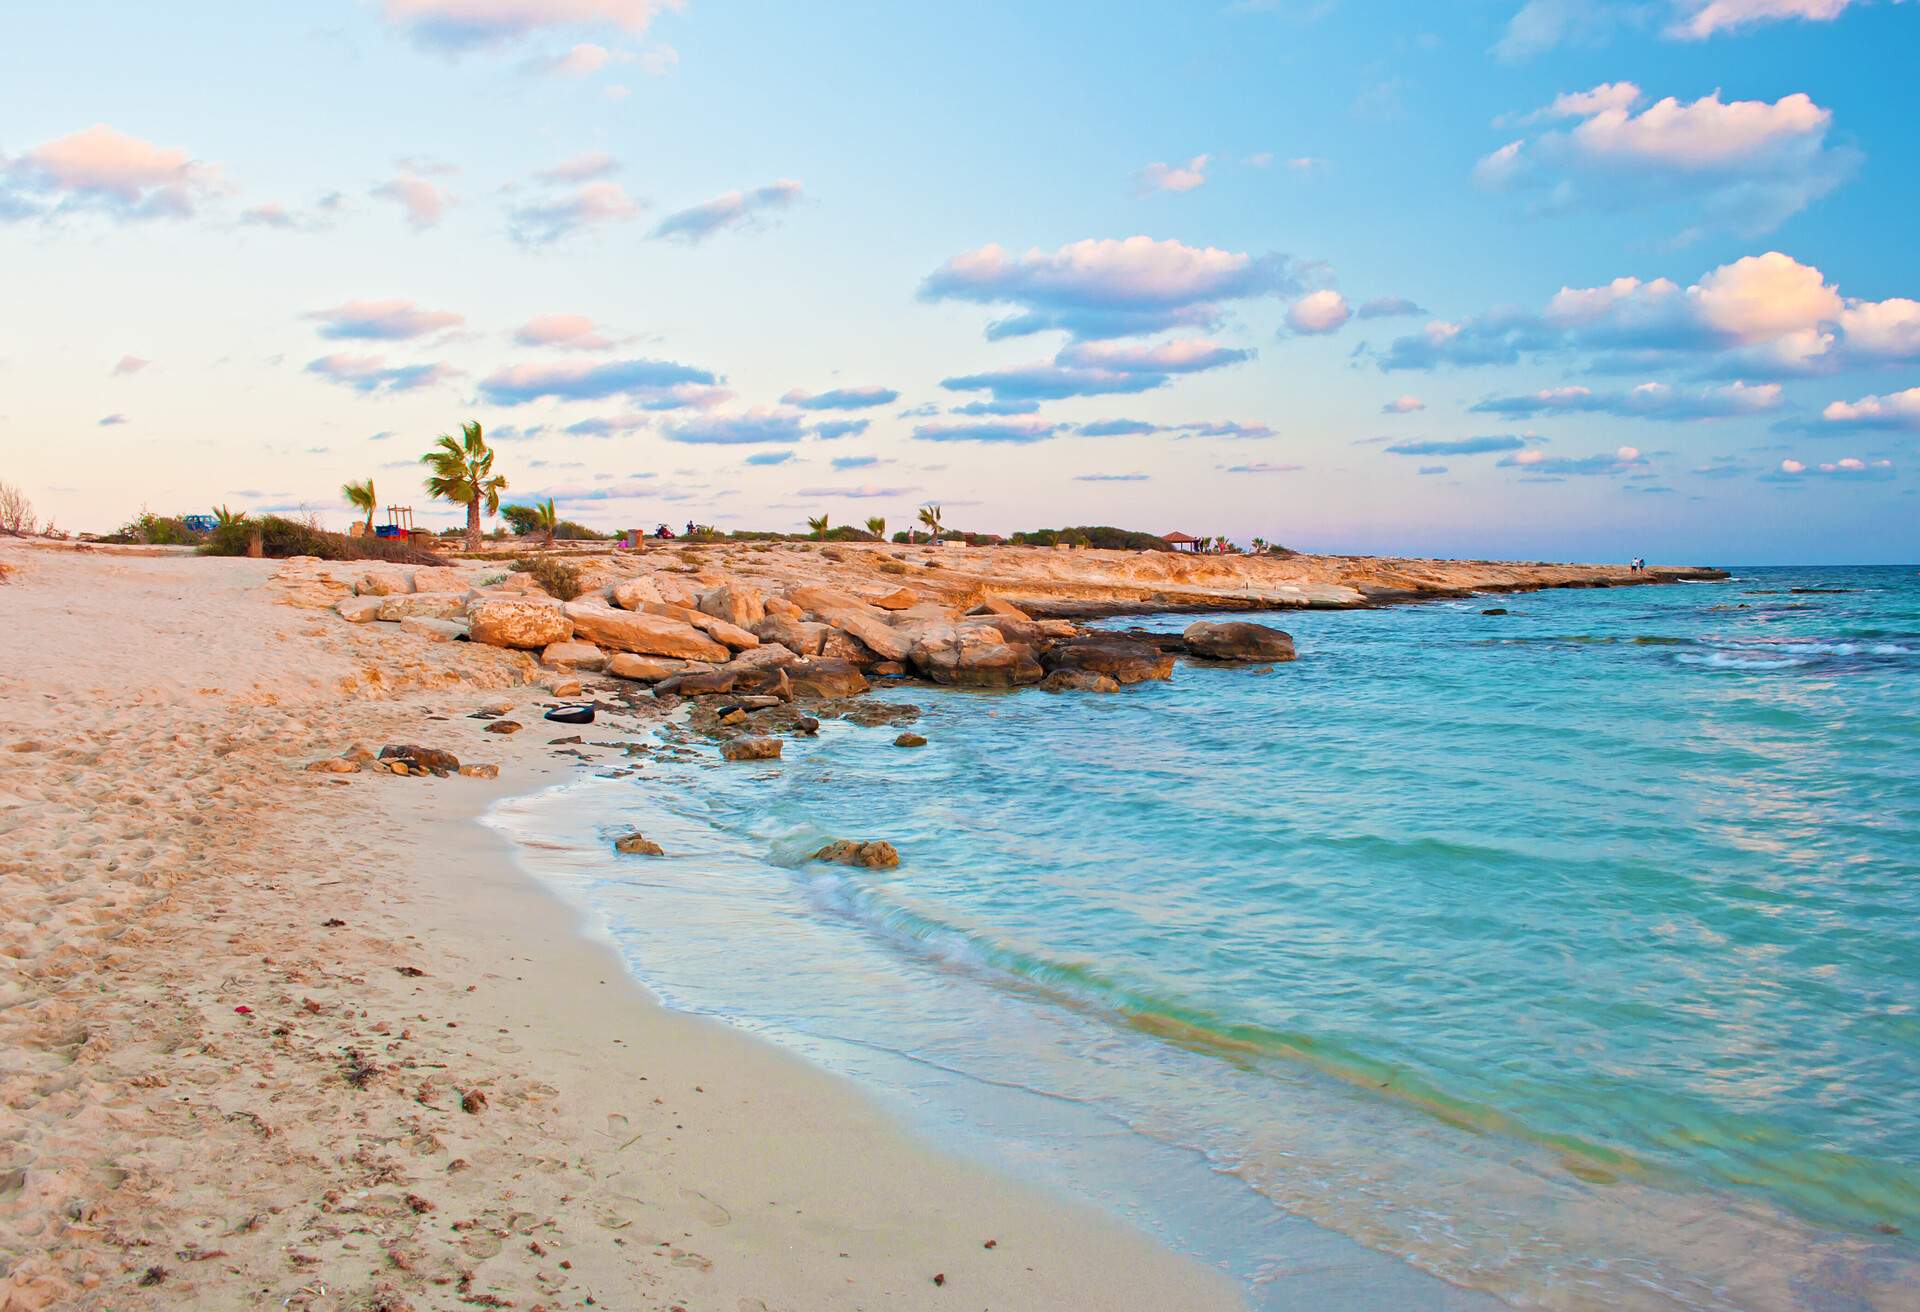 Image of breathtaking Landa beach in Agia Napa, Cyprus. Yellow sand and boulders against blue calm water with small waves on a warm evening in fall, small clouds in the sky. Shot during golden hour